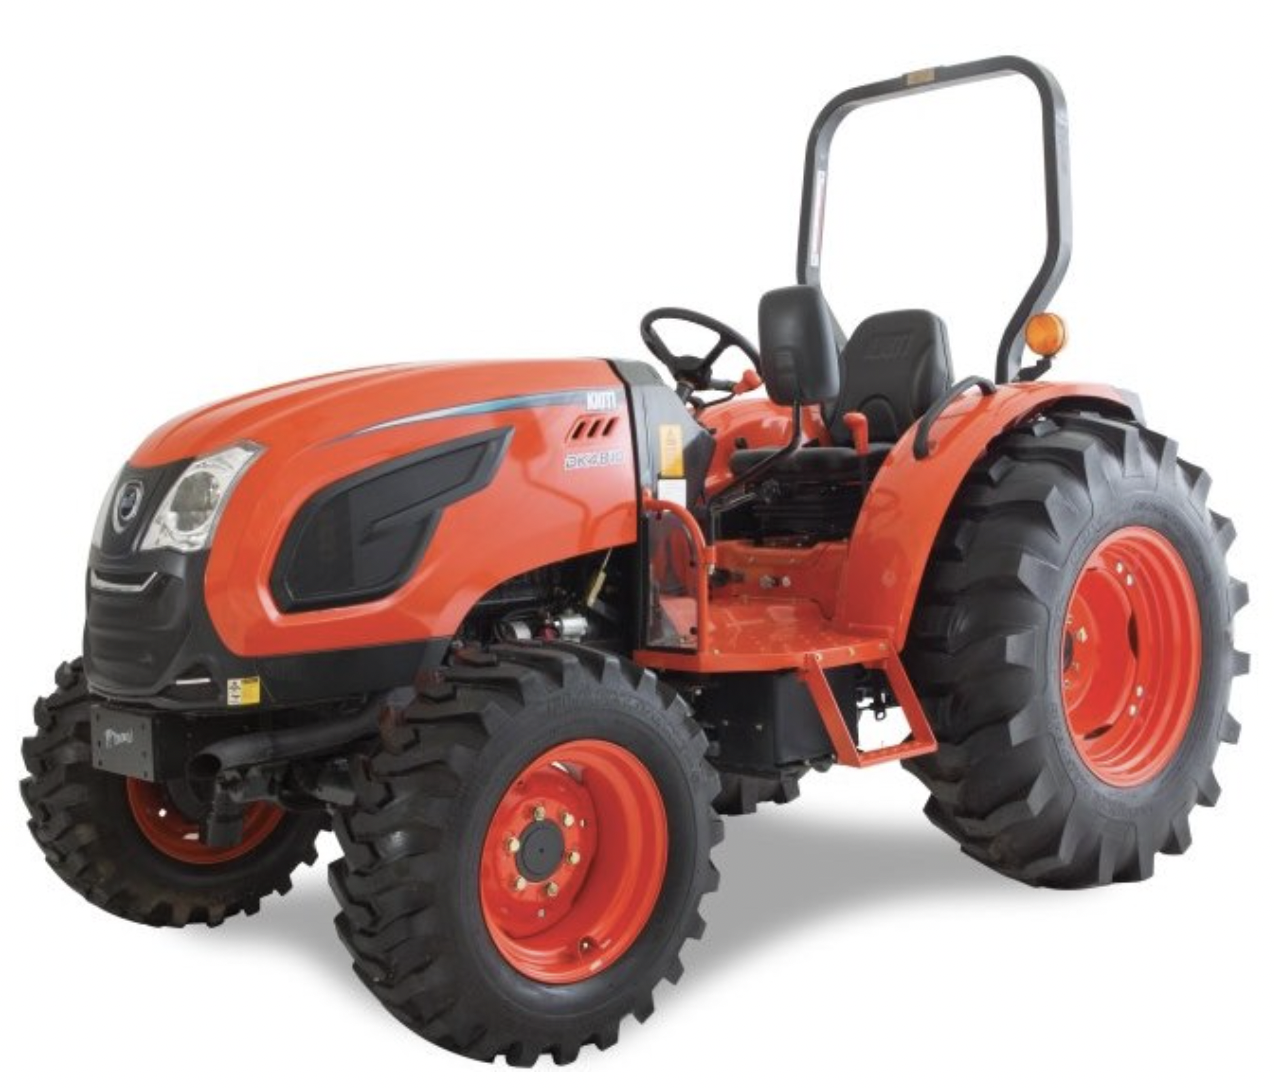 Compact tractors for sale such as Kioti's DK Series are suited to small to medium acreages